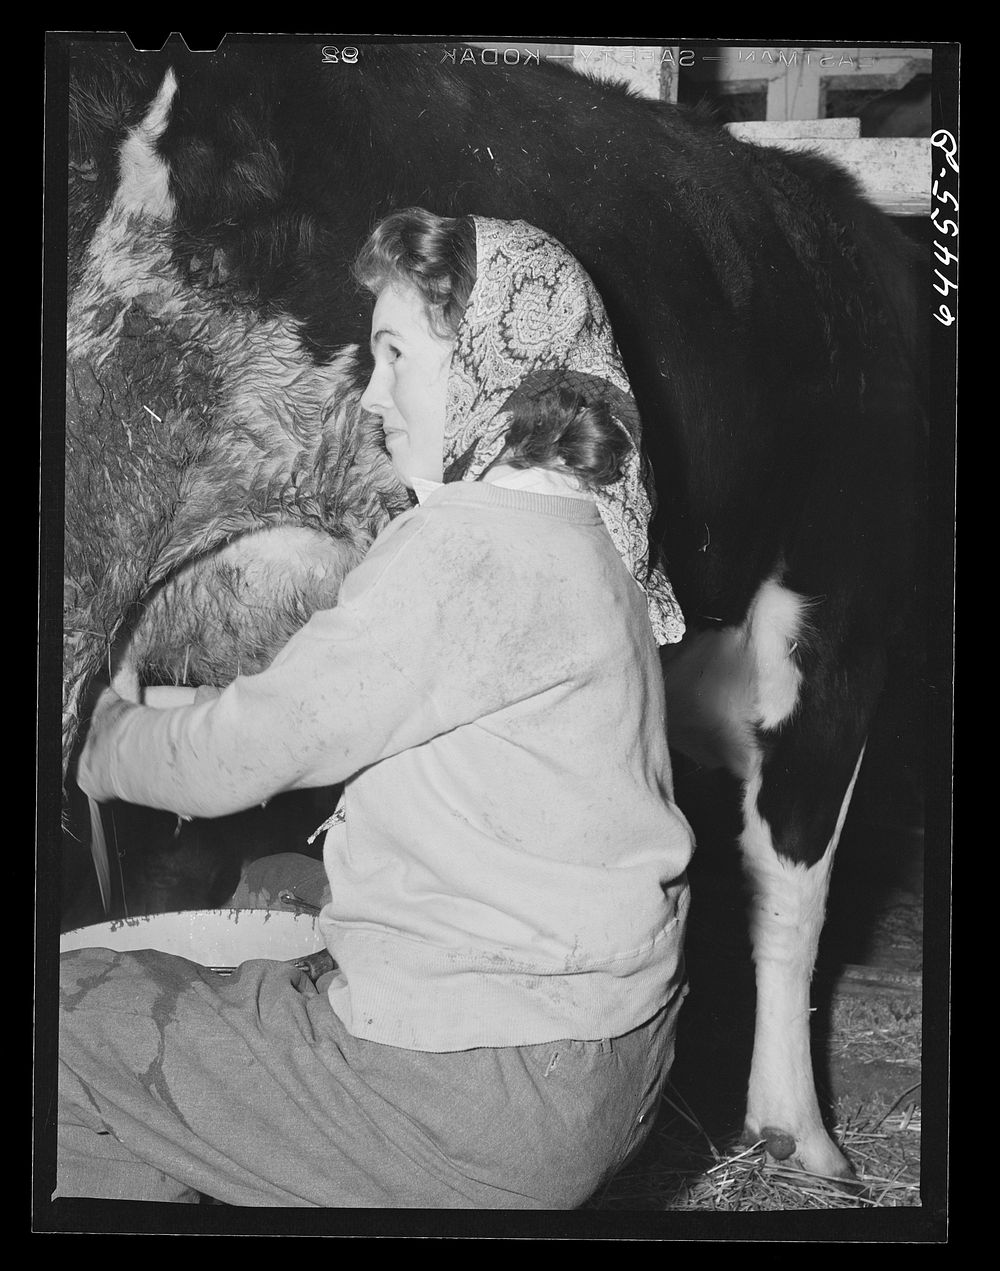 [Untitled photo, possibly related to: Meeker County, Minnesota. One of the McRaith grandchildren milking] by John Vachon